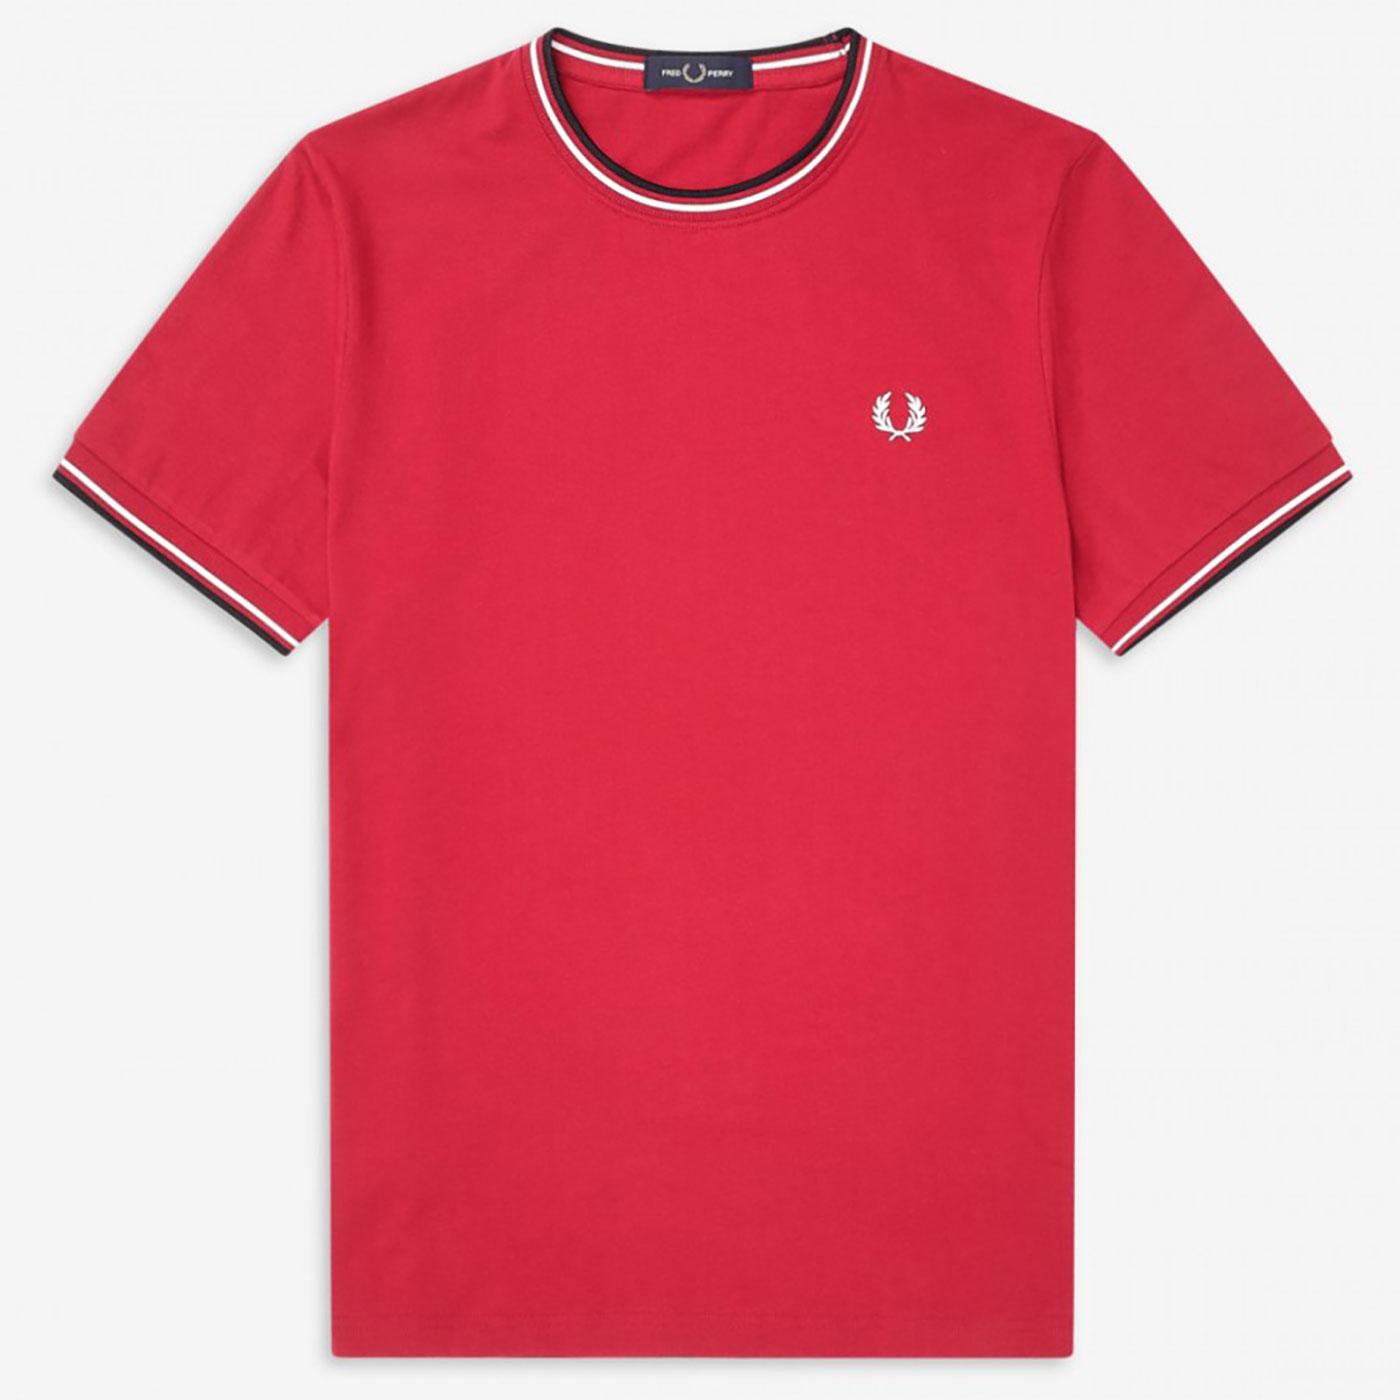 FRED PERRY Retro Mod Twin Tipped T-Shirt SIREN